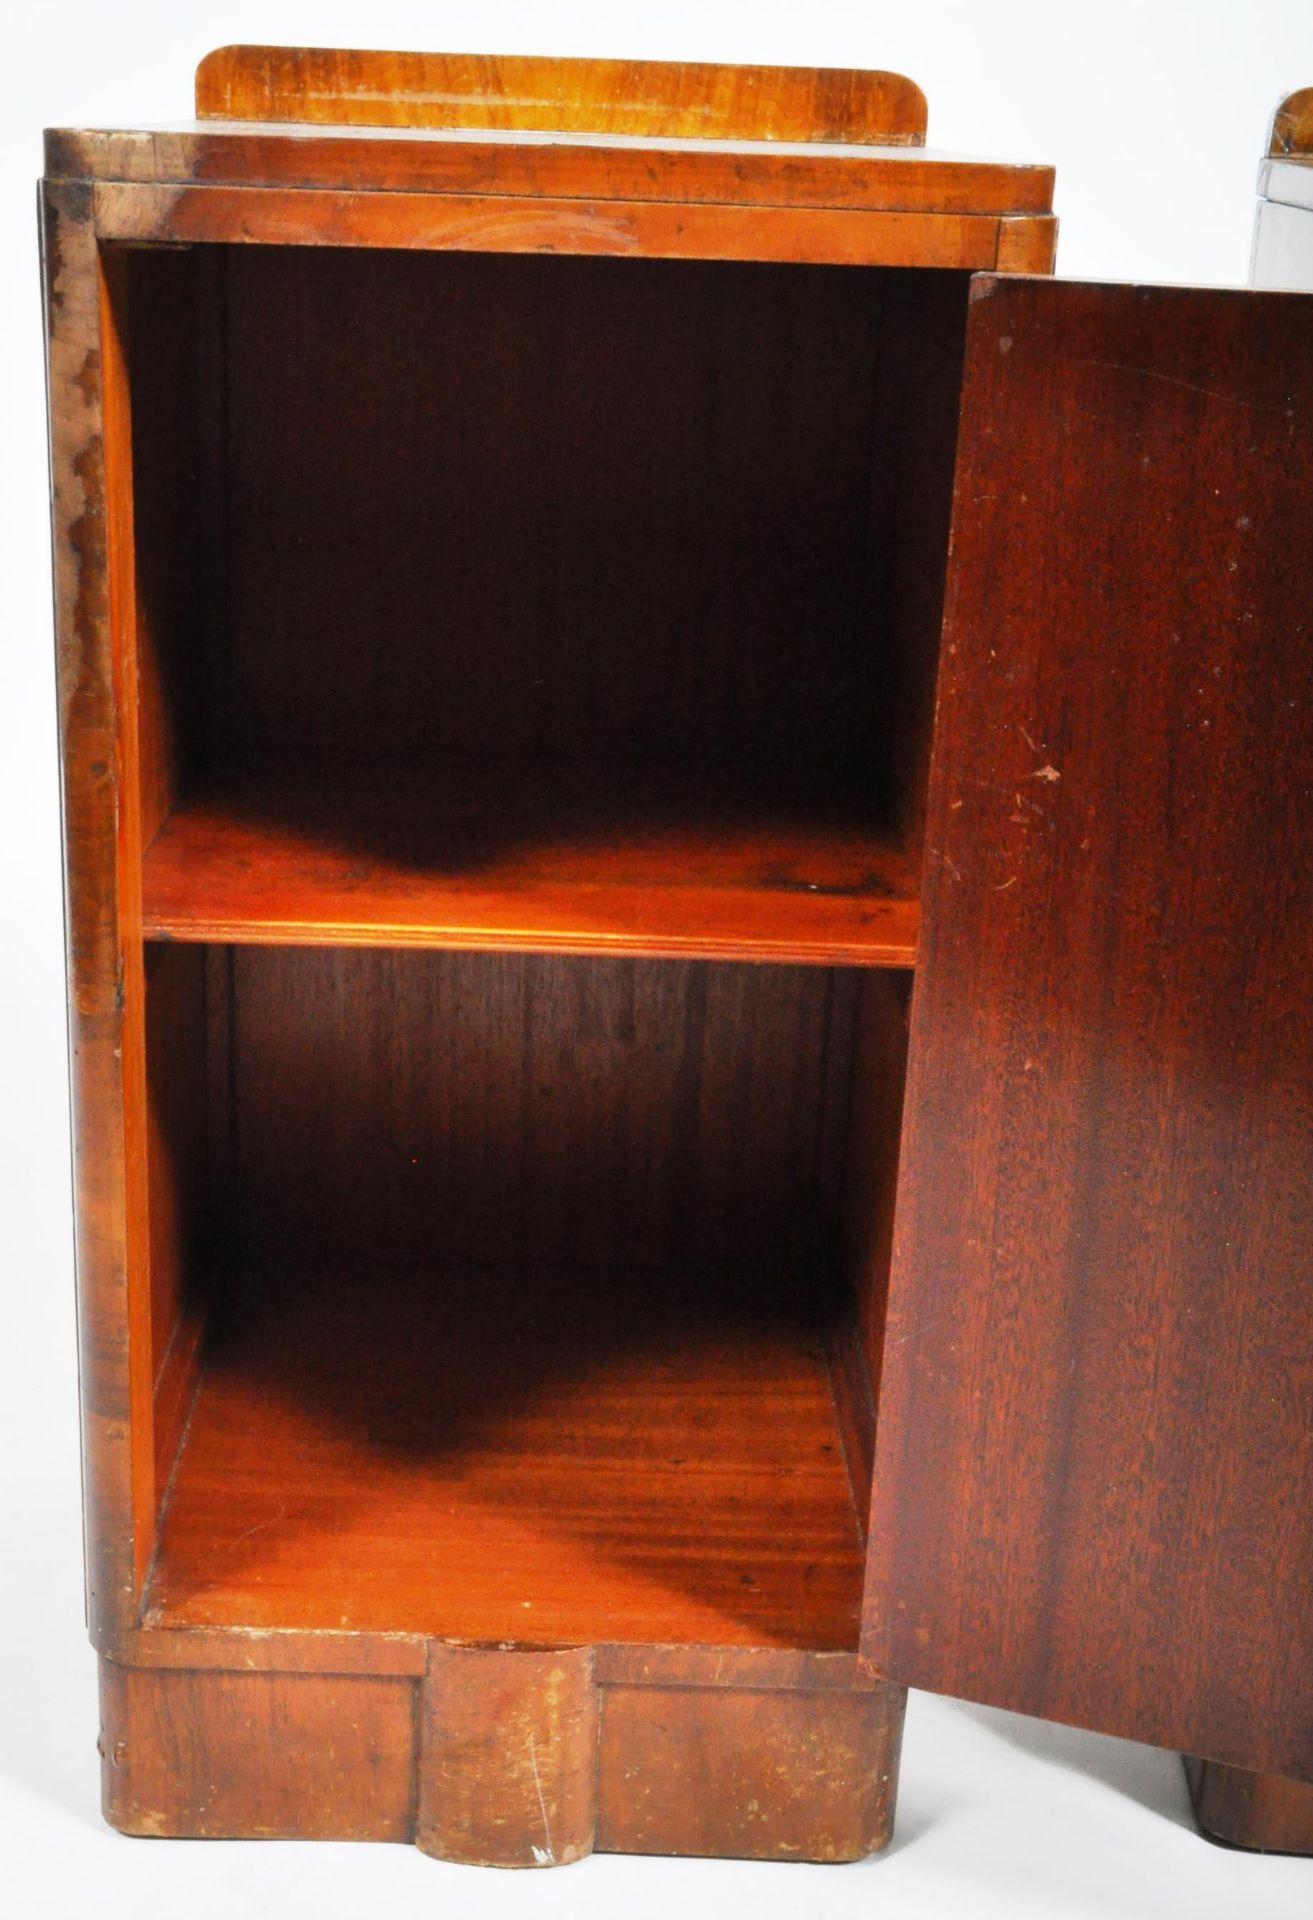 PAIR OF 1930S ART DECO WALNUT BEDSIDE TABLE CUPBOARDS - Image 6 of 7